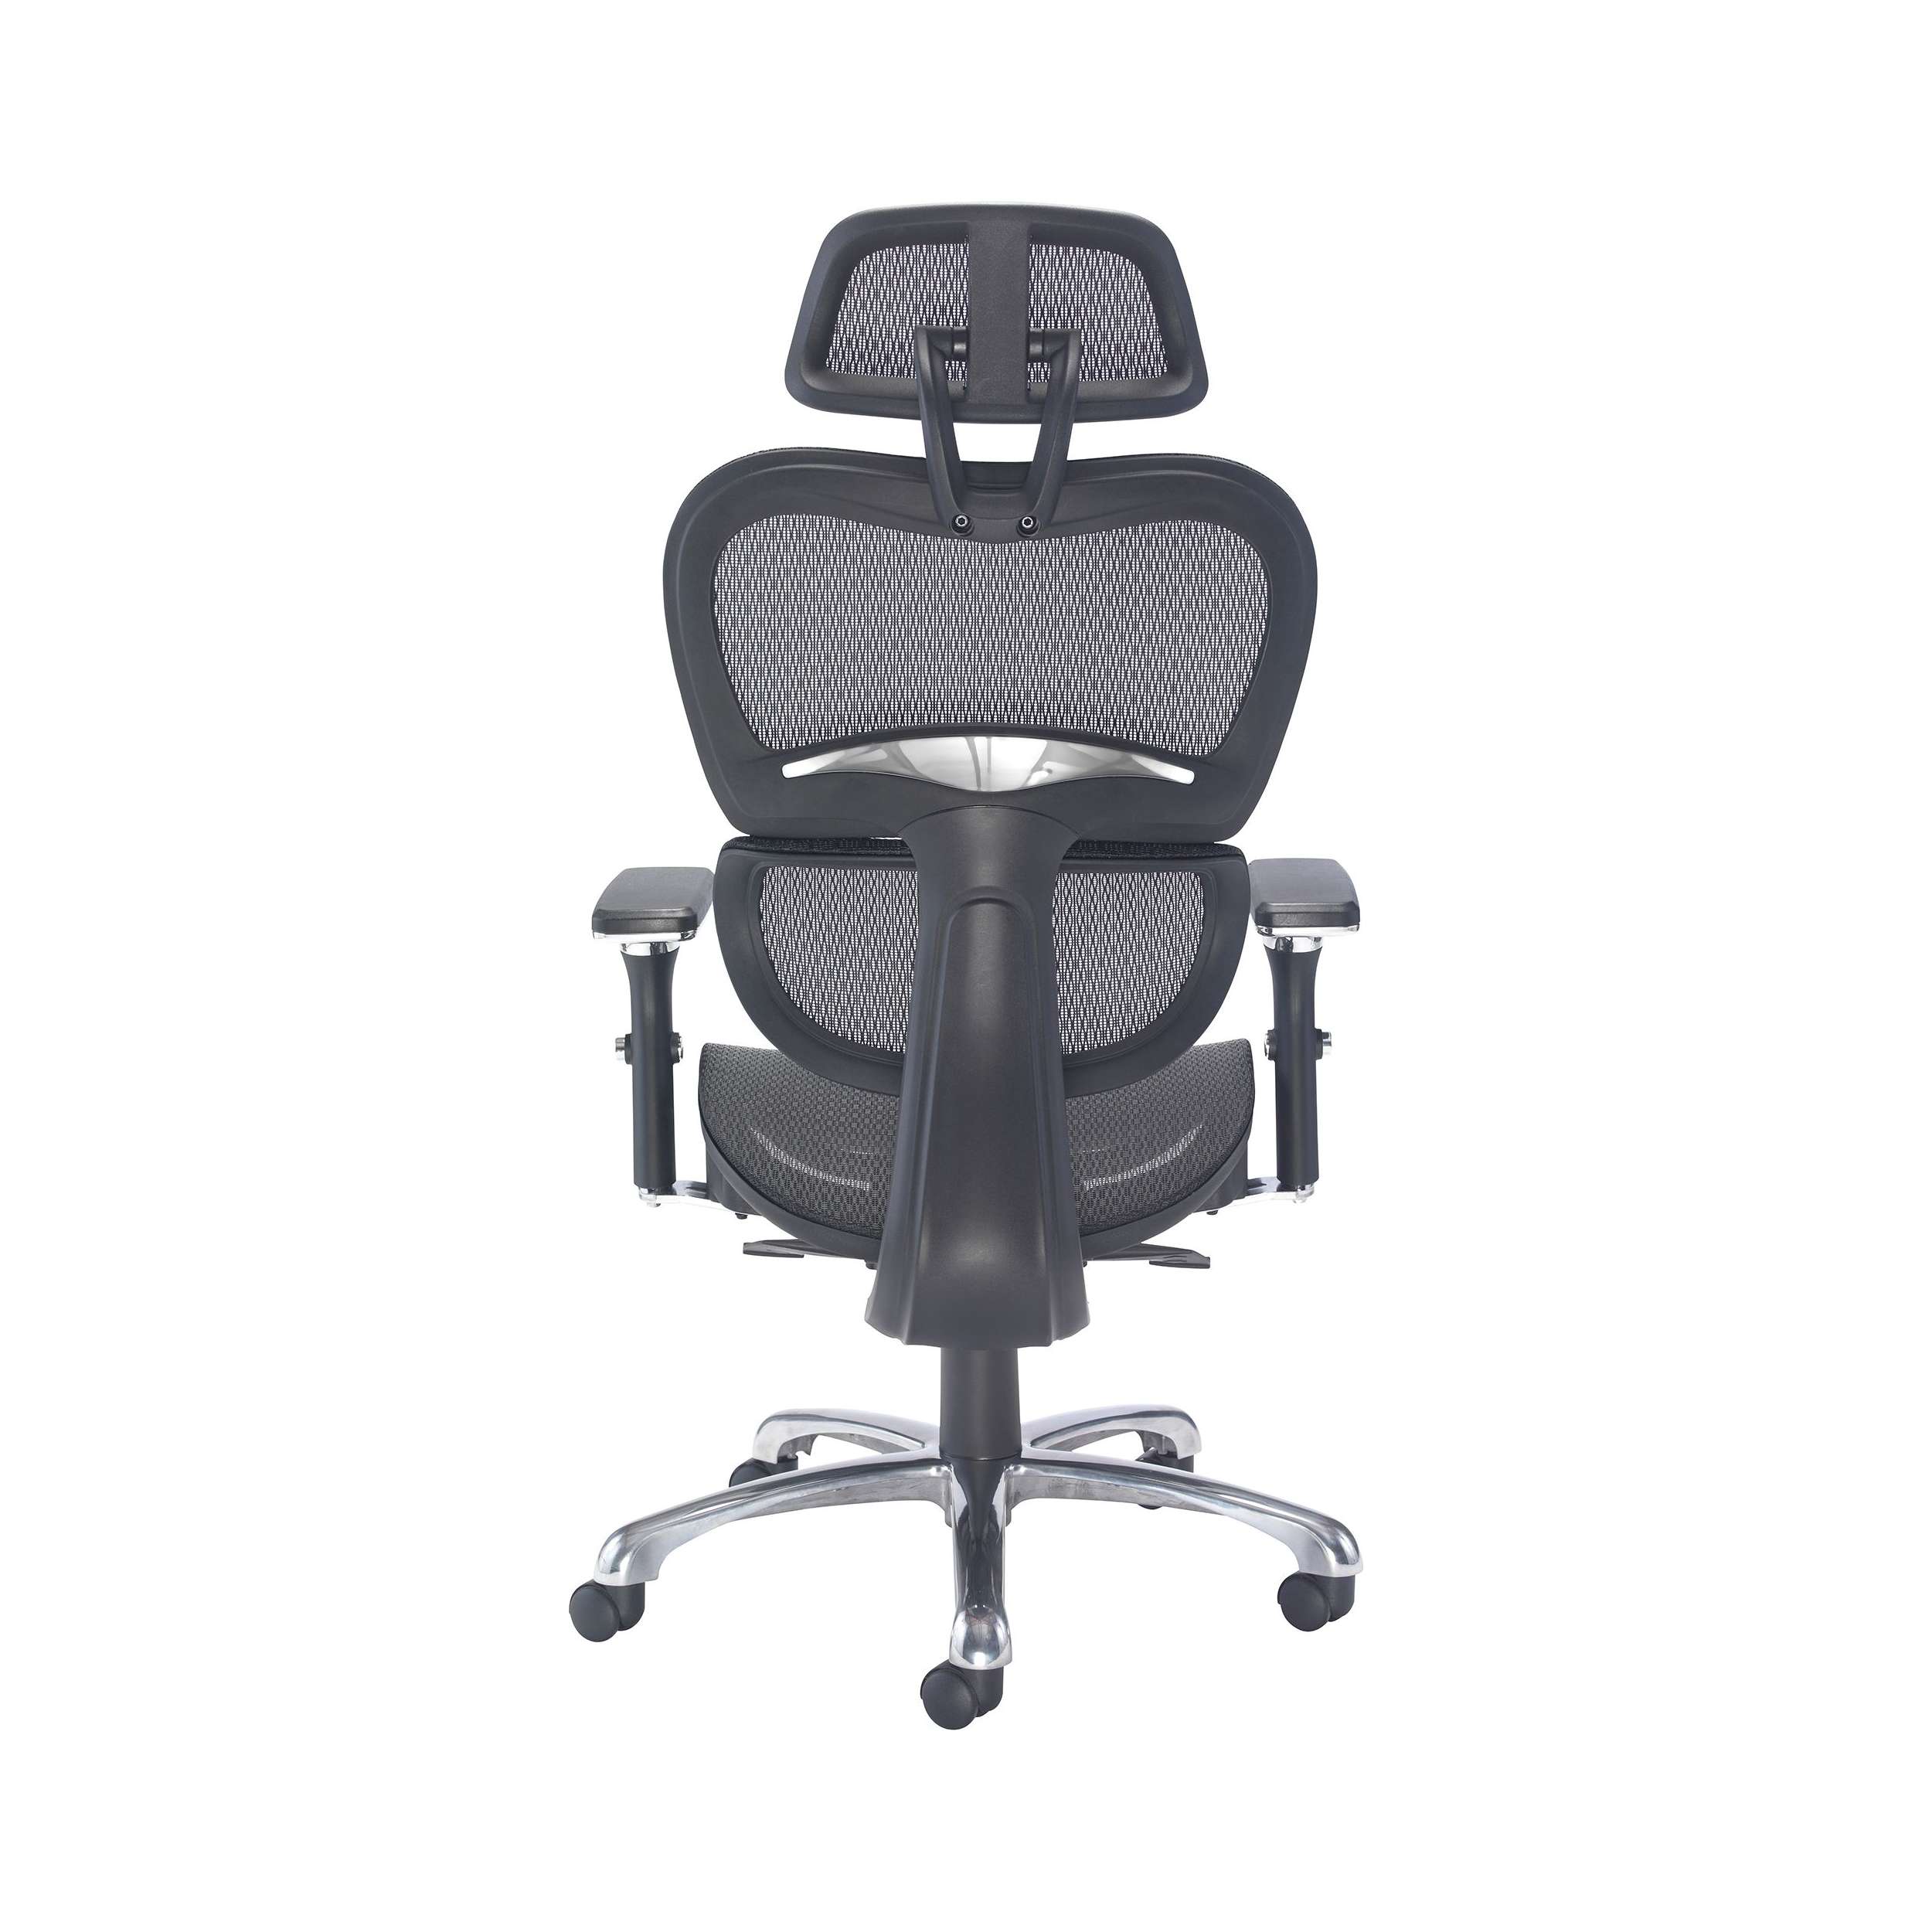 Chachi Posture Mesh Office Chair from our Mesh Office Chairs range.